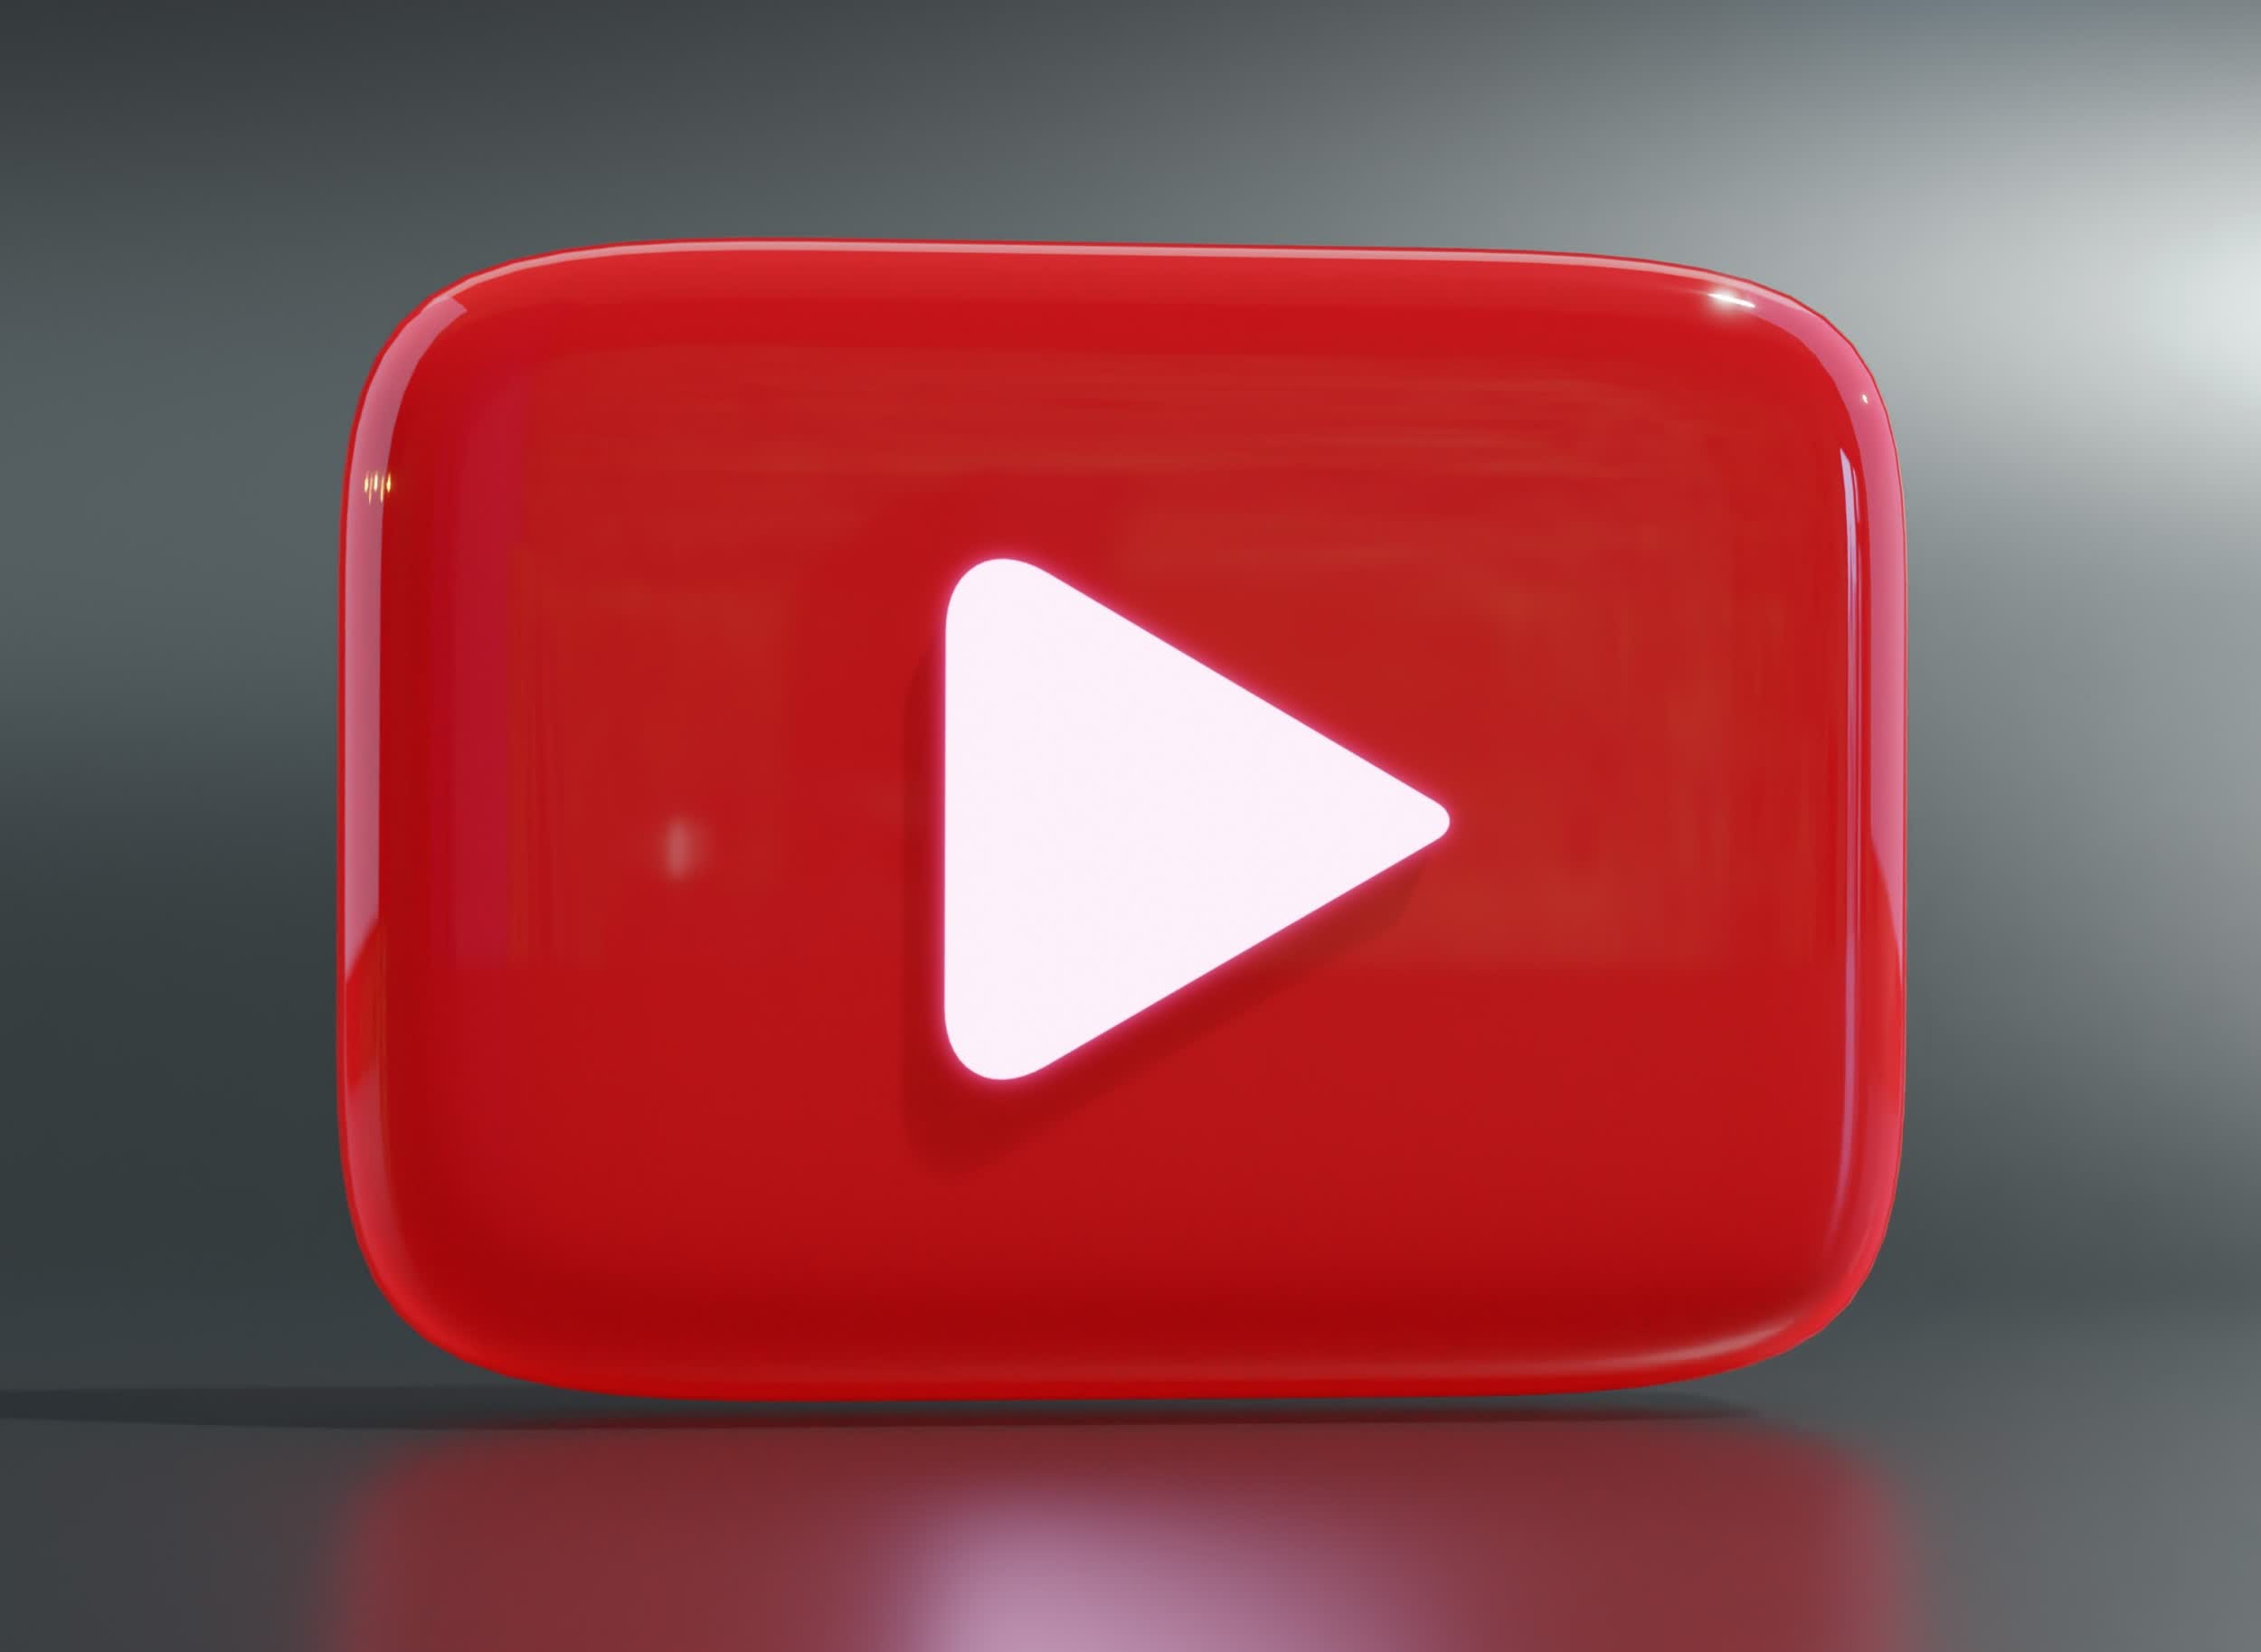 YouTube starts asking users to subscribe to Premium for 4K videos